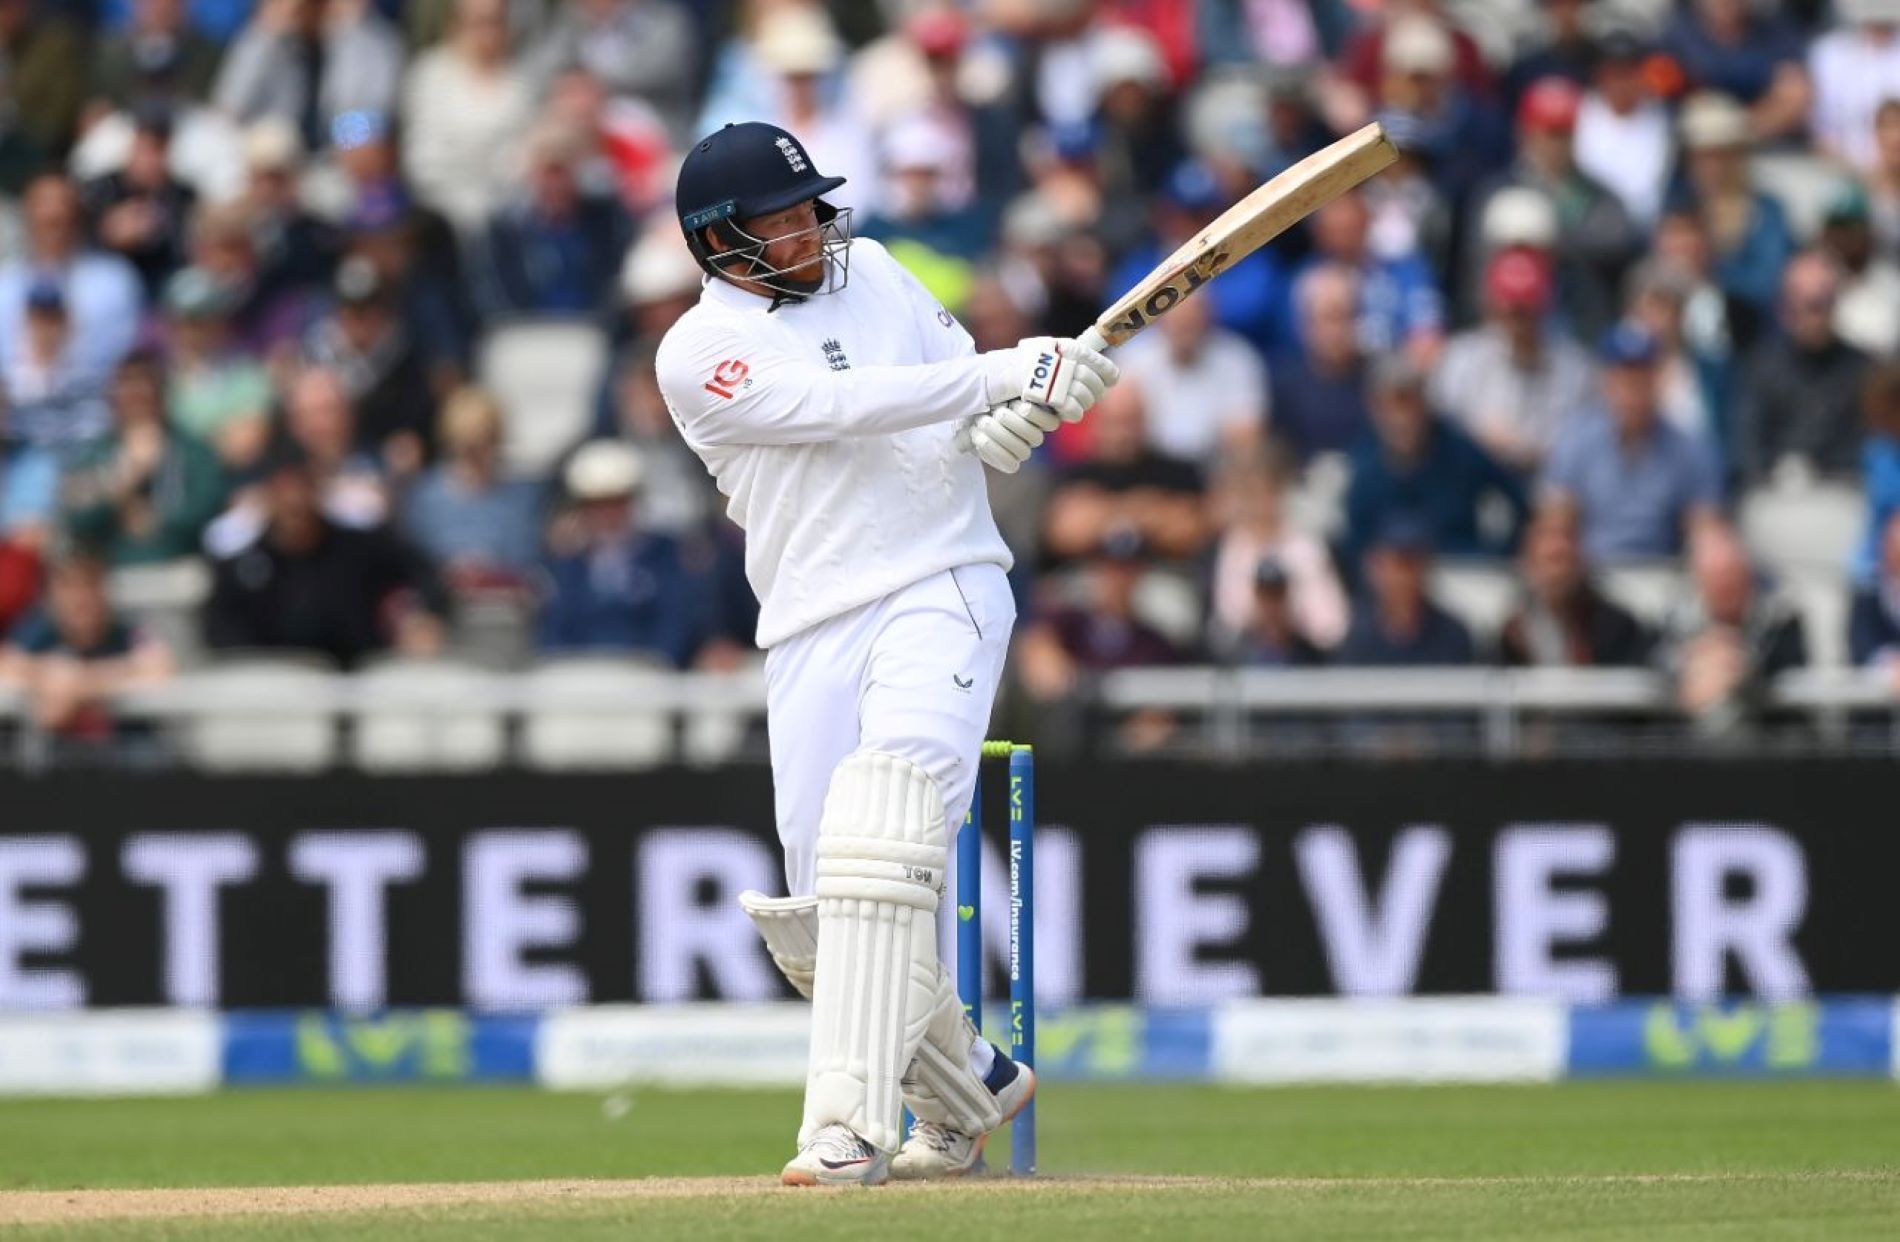 Jonny Bairstow thrilled the Manchester crowd with a sparkling innings